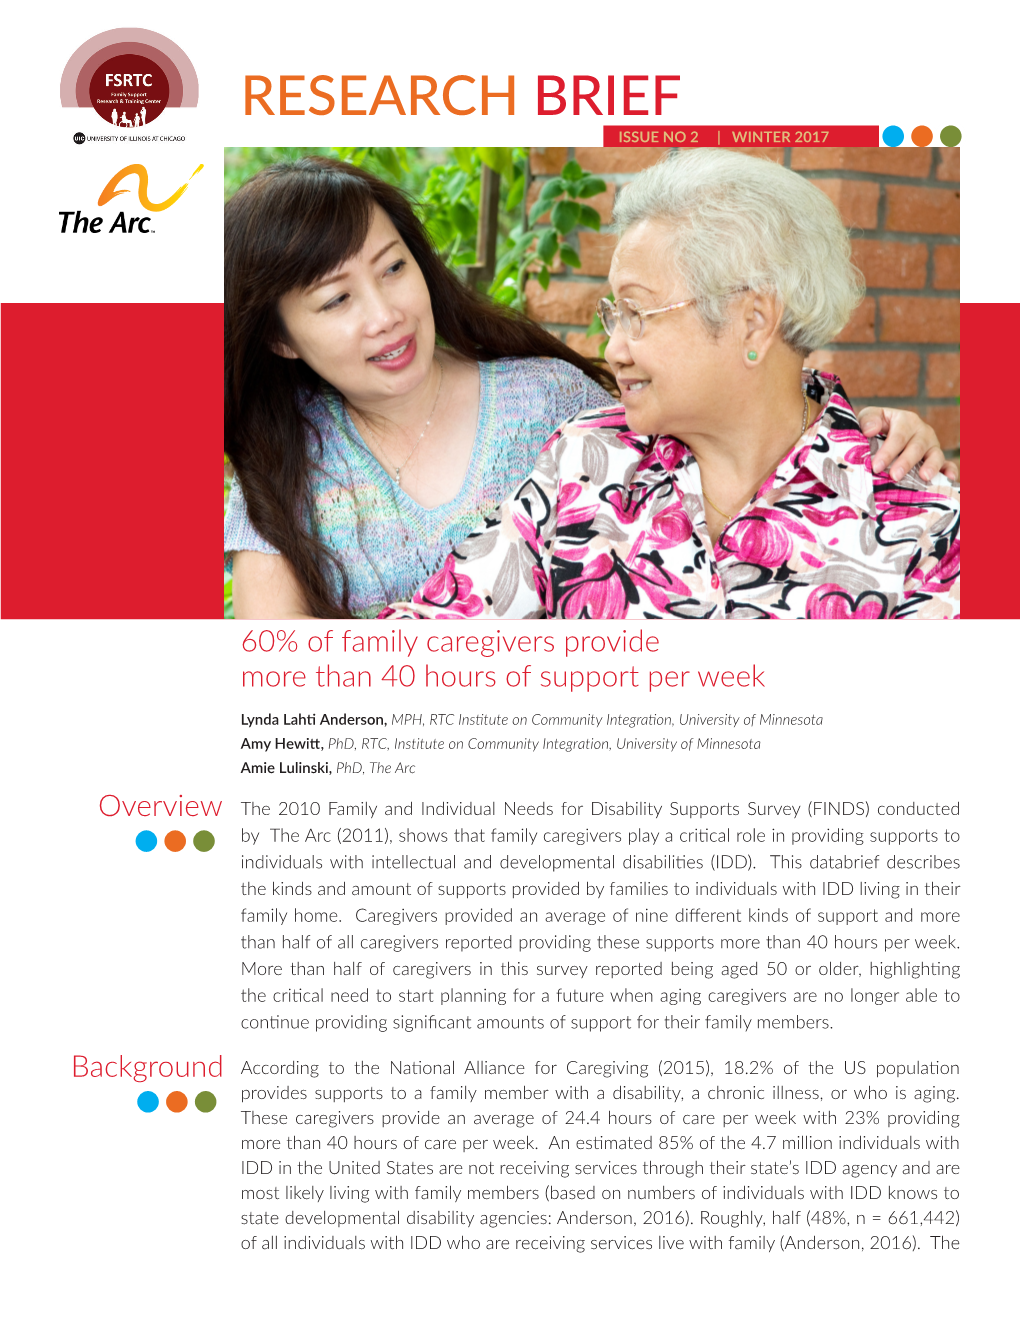 FINDS Family Caregivers UIC Databrief